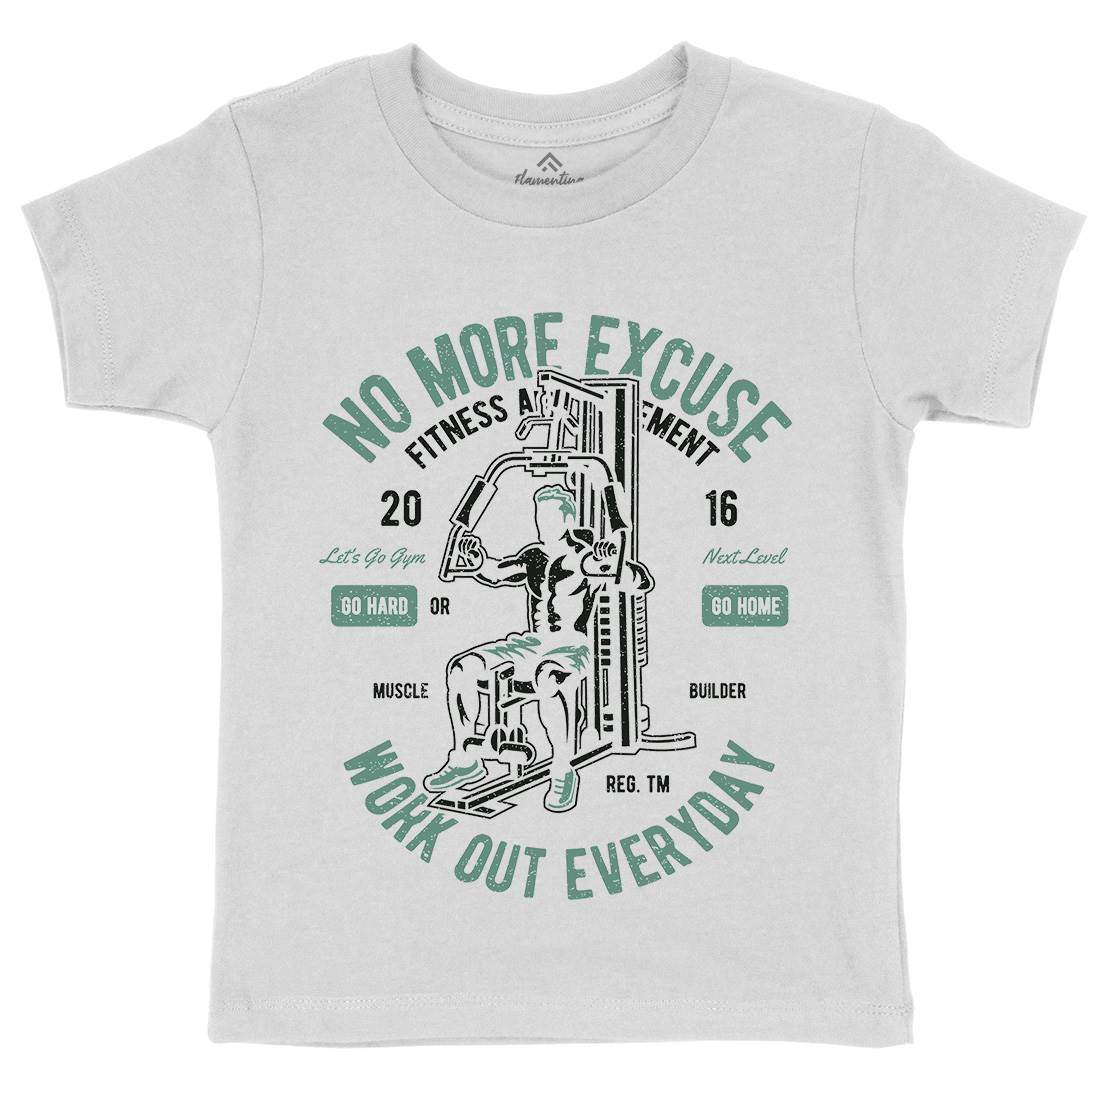 Work Out Everyday Kids Crew Neck T-Shirt Gym A198